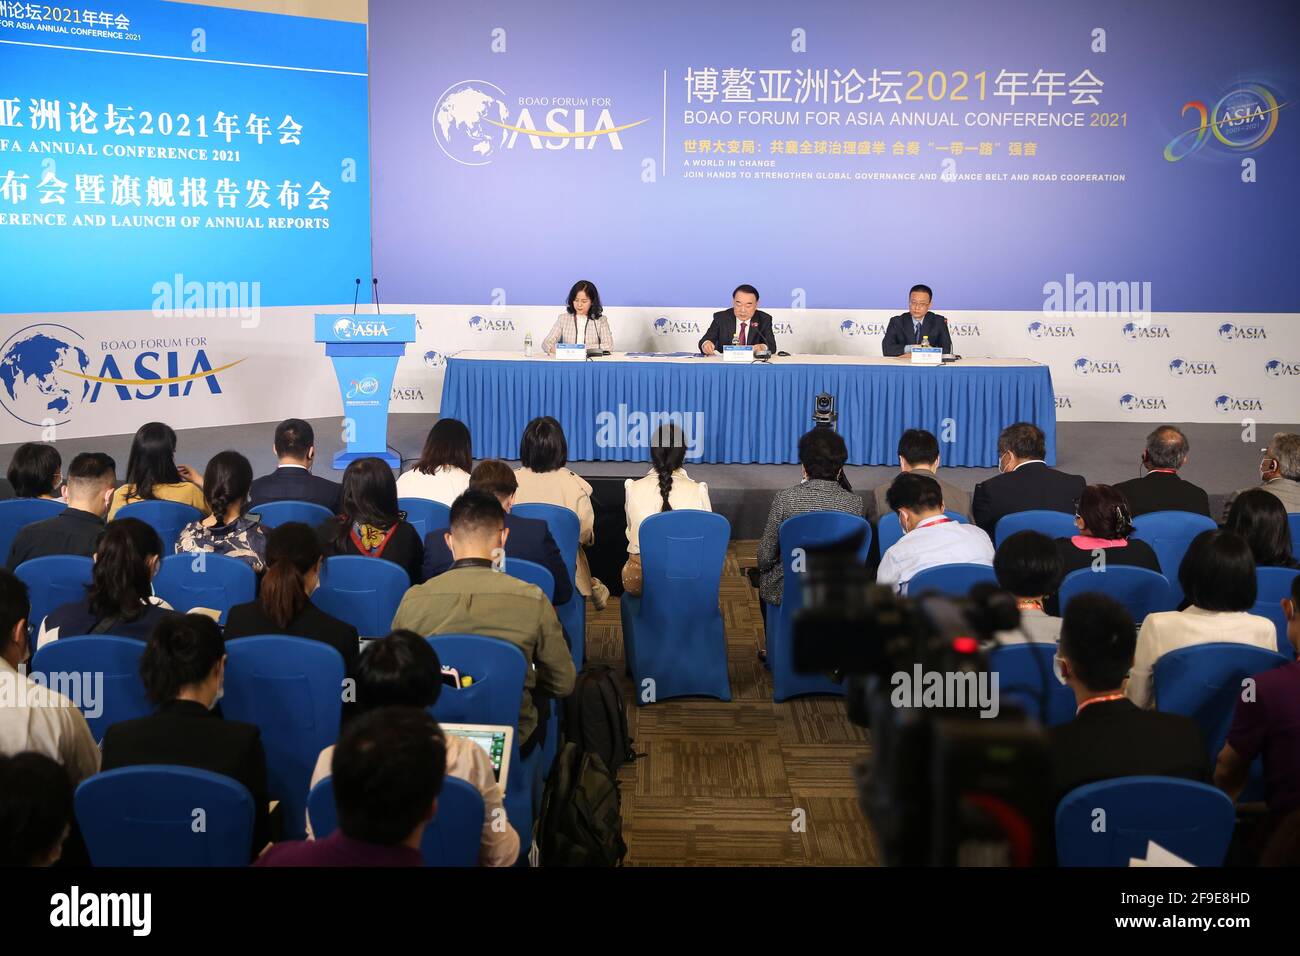 Boao. 18th Apr, 2021. Photo taken on April 18, 2021 shows the press conference of the 2021 Boao Forum for Asia (BFA) annual conference and the launch of annual reports in Boao Town, south China's Hainan Province. Over 2,600 delegates, including government officials, entrepreneurs and scholars from over 60 countries and regions are expected to attend the 2021 BFA annual conference in person. Approximately 1,200 journalists from 160 media organizations in 18 countries and regions will attend the conference. Credit: Zhang Liyun/Xinhua/Alamy Live News Stock Photo